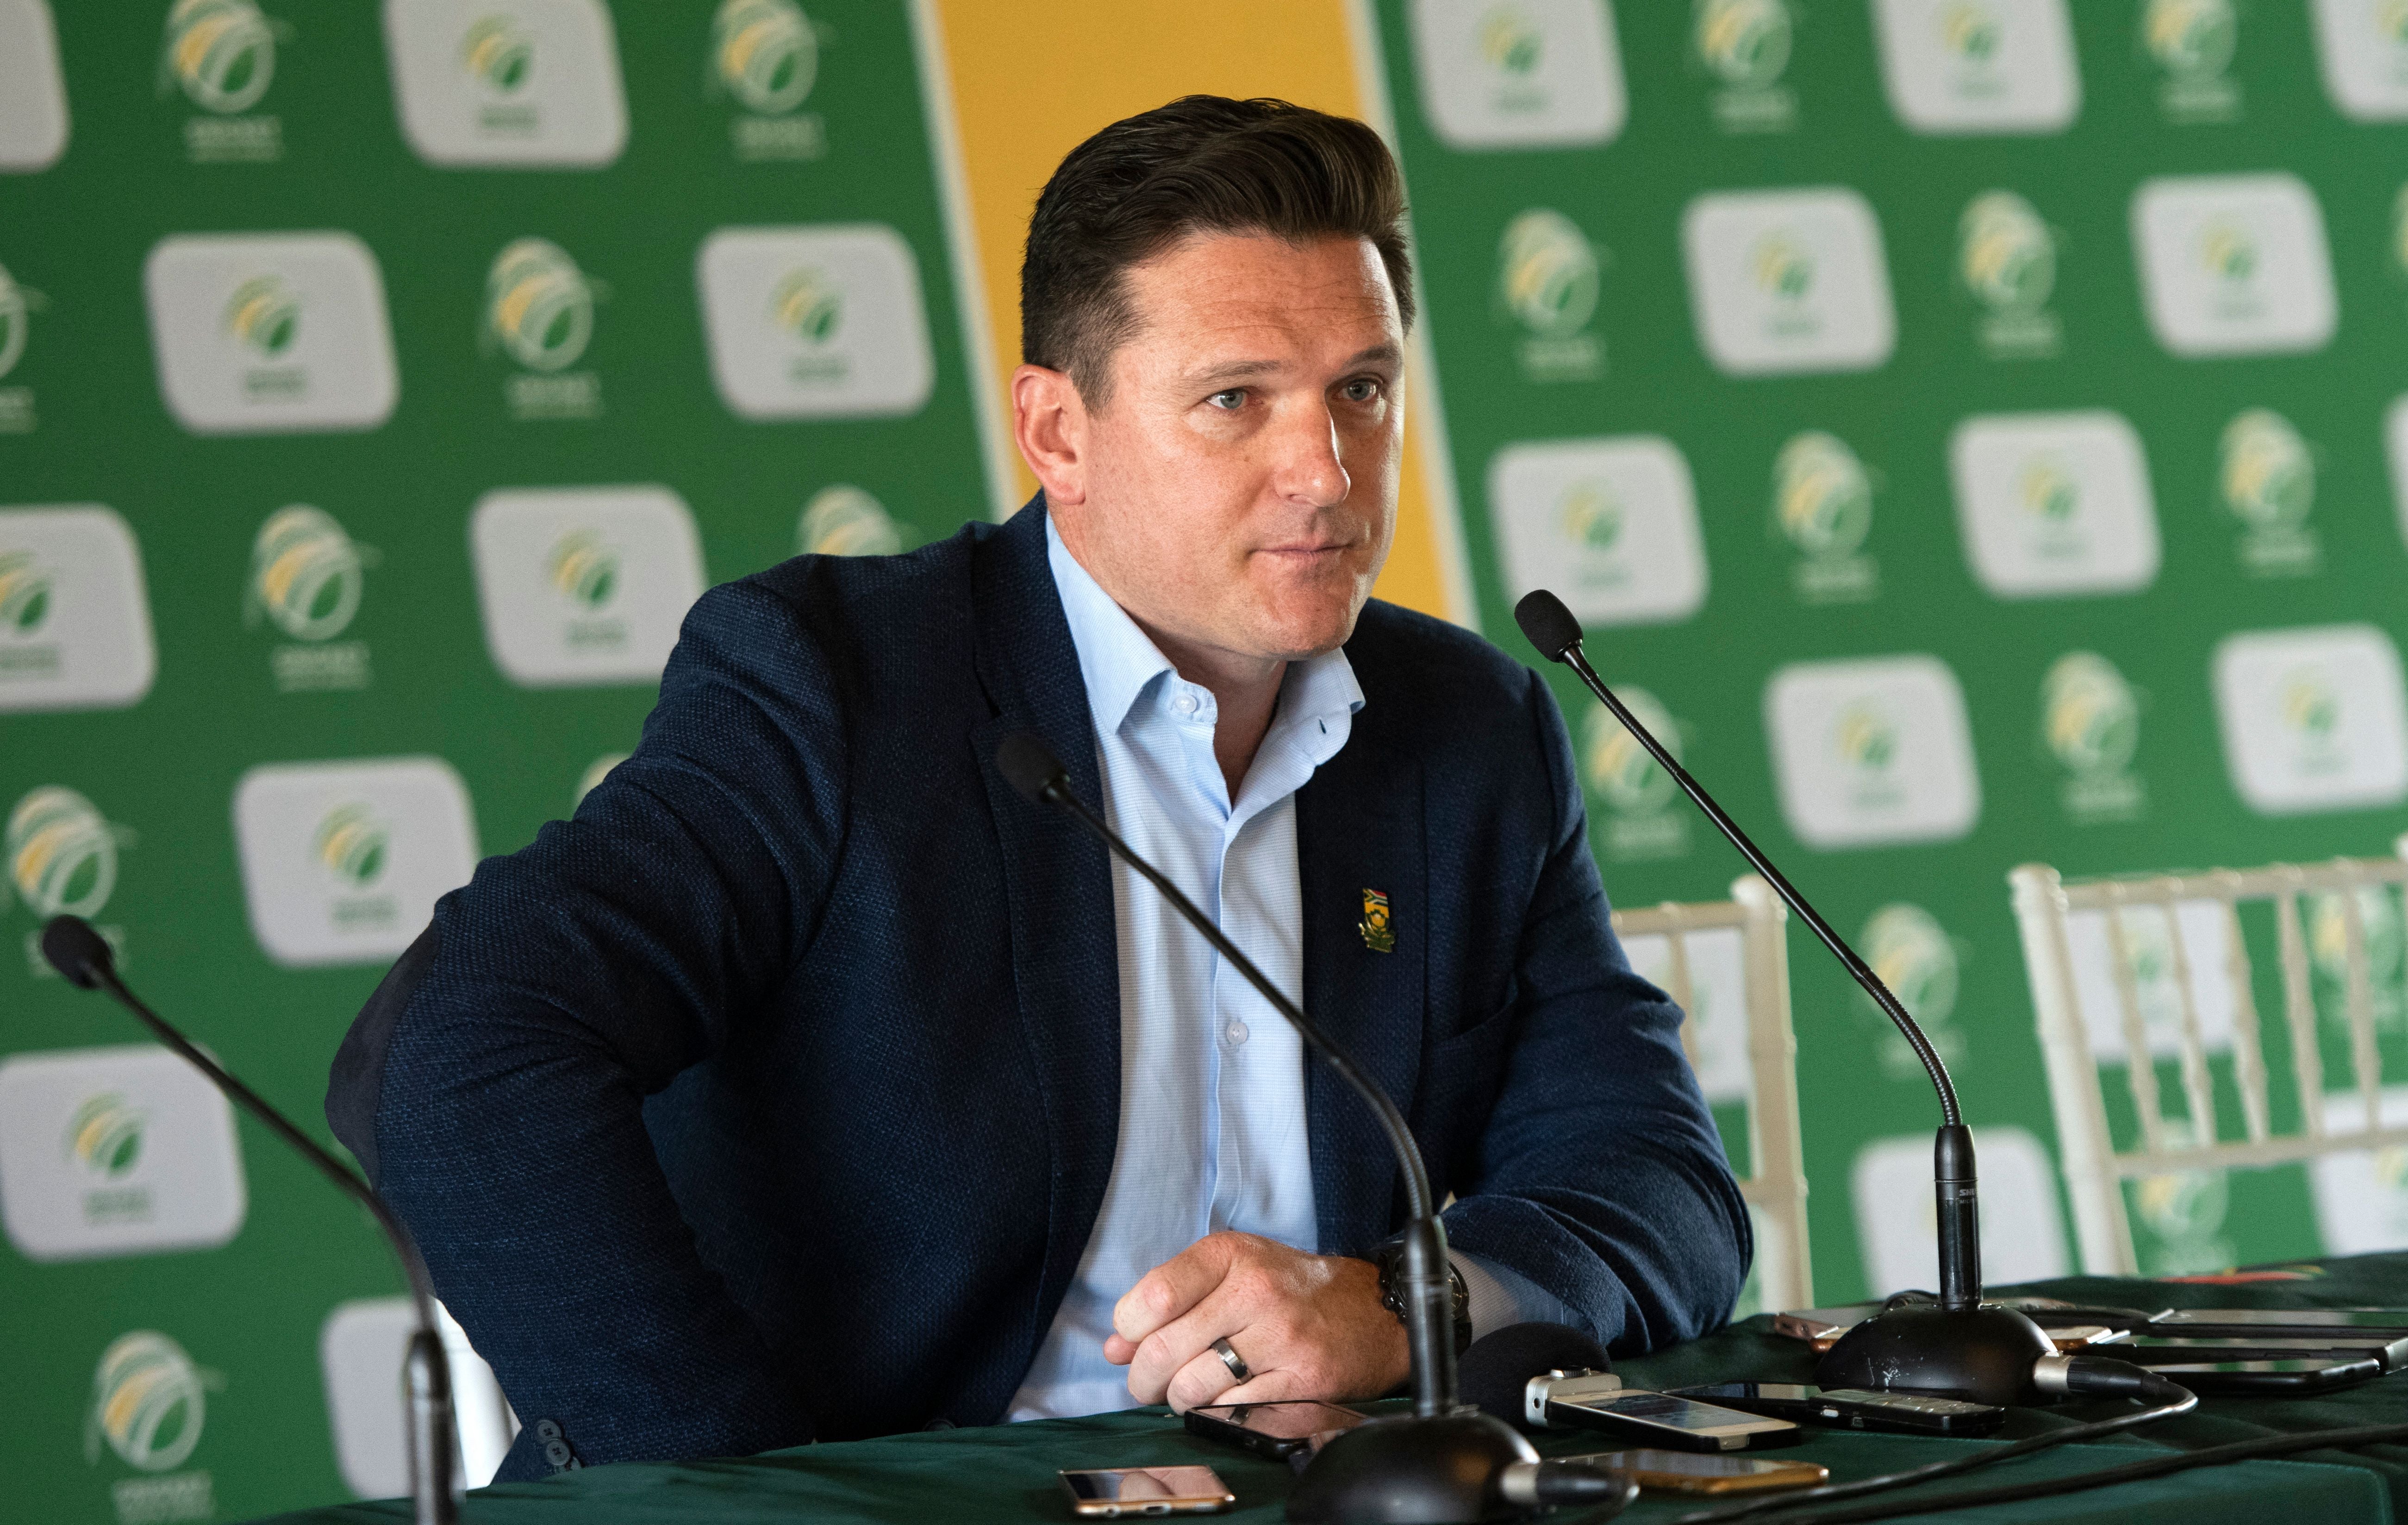 Graeme Smith made his Test debut in a completely different cricketing climate back in 2002